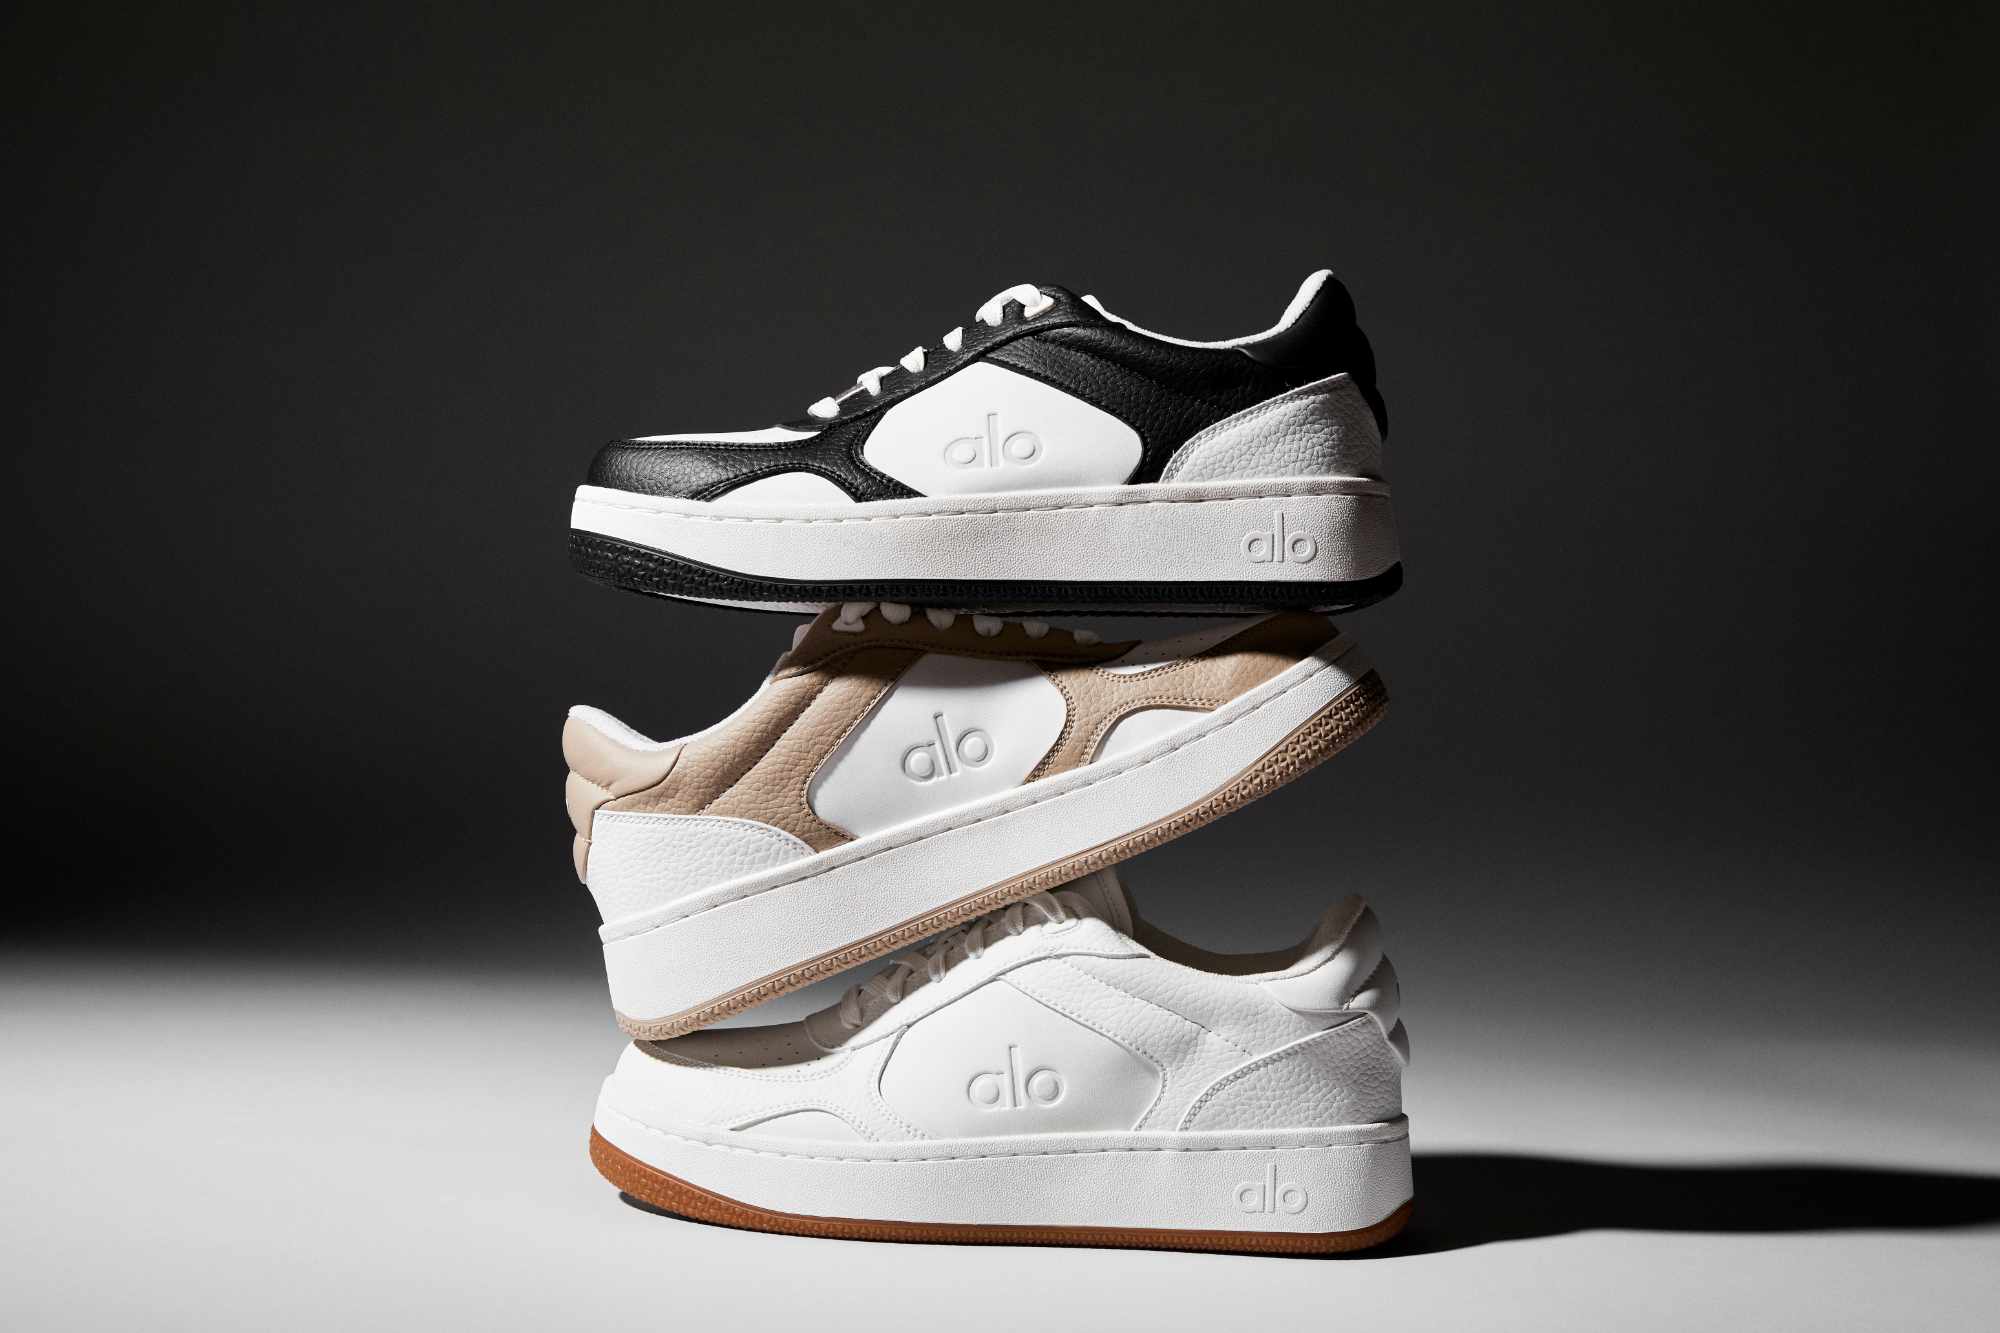 Alo Yoga's Recovery Mode Sneaker, formerly known as the X 01 shoe